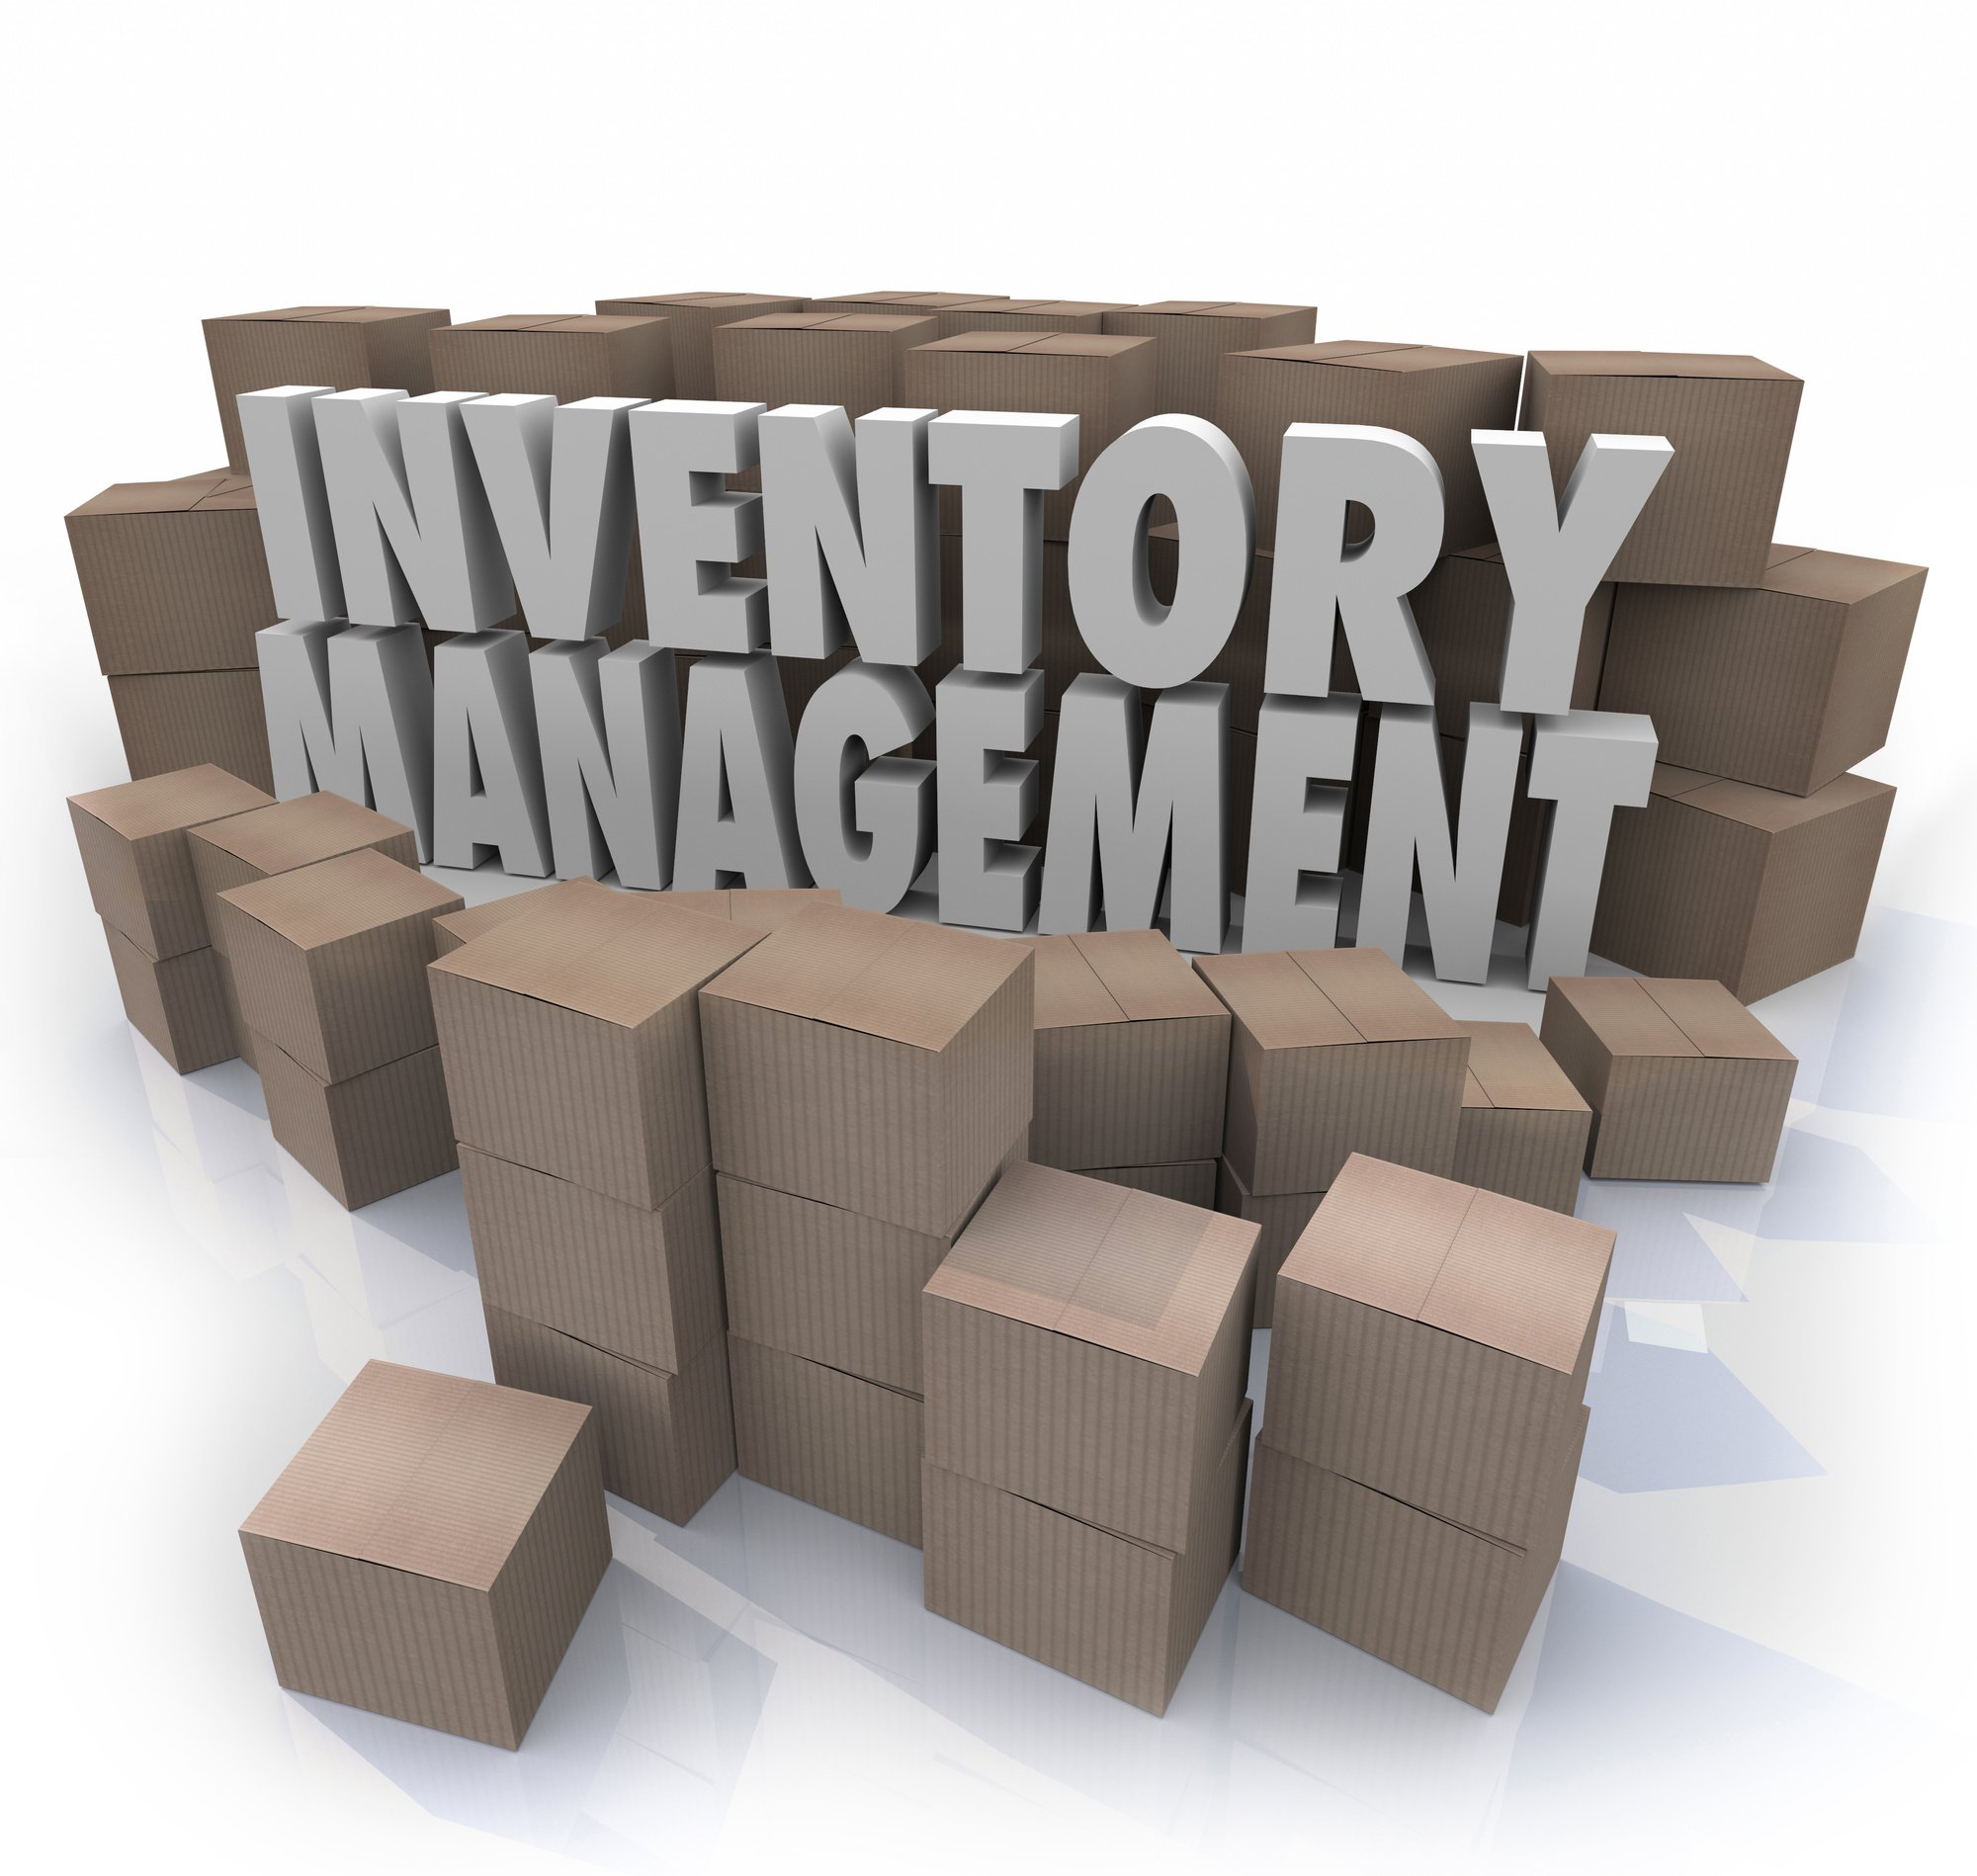 taking-stock-of-your-inventory-management-techniques-10-tips-for